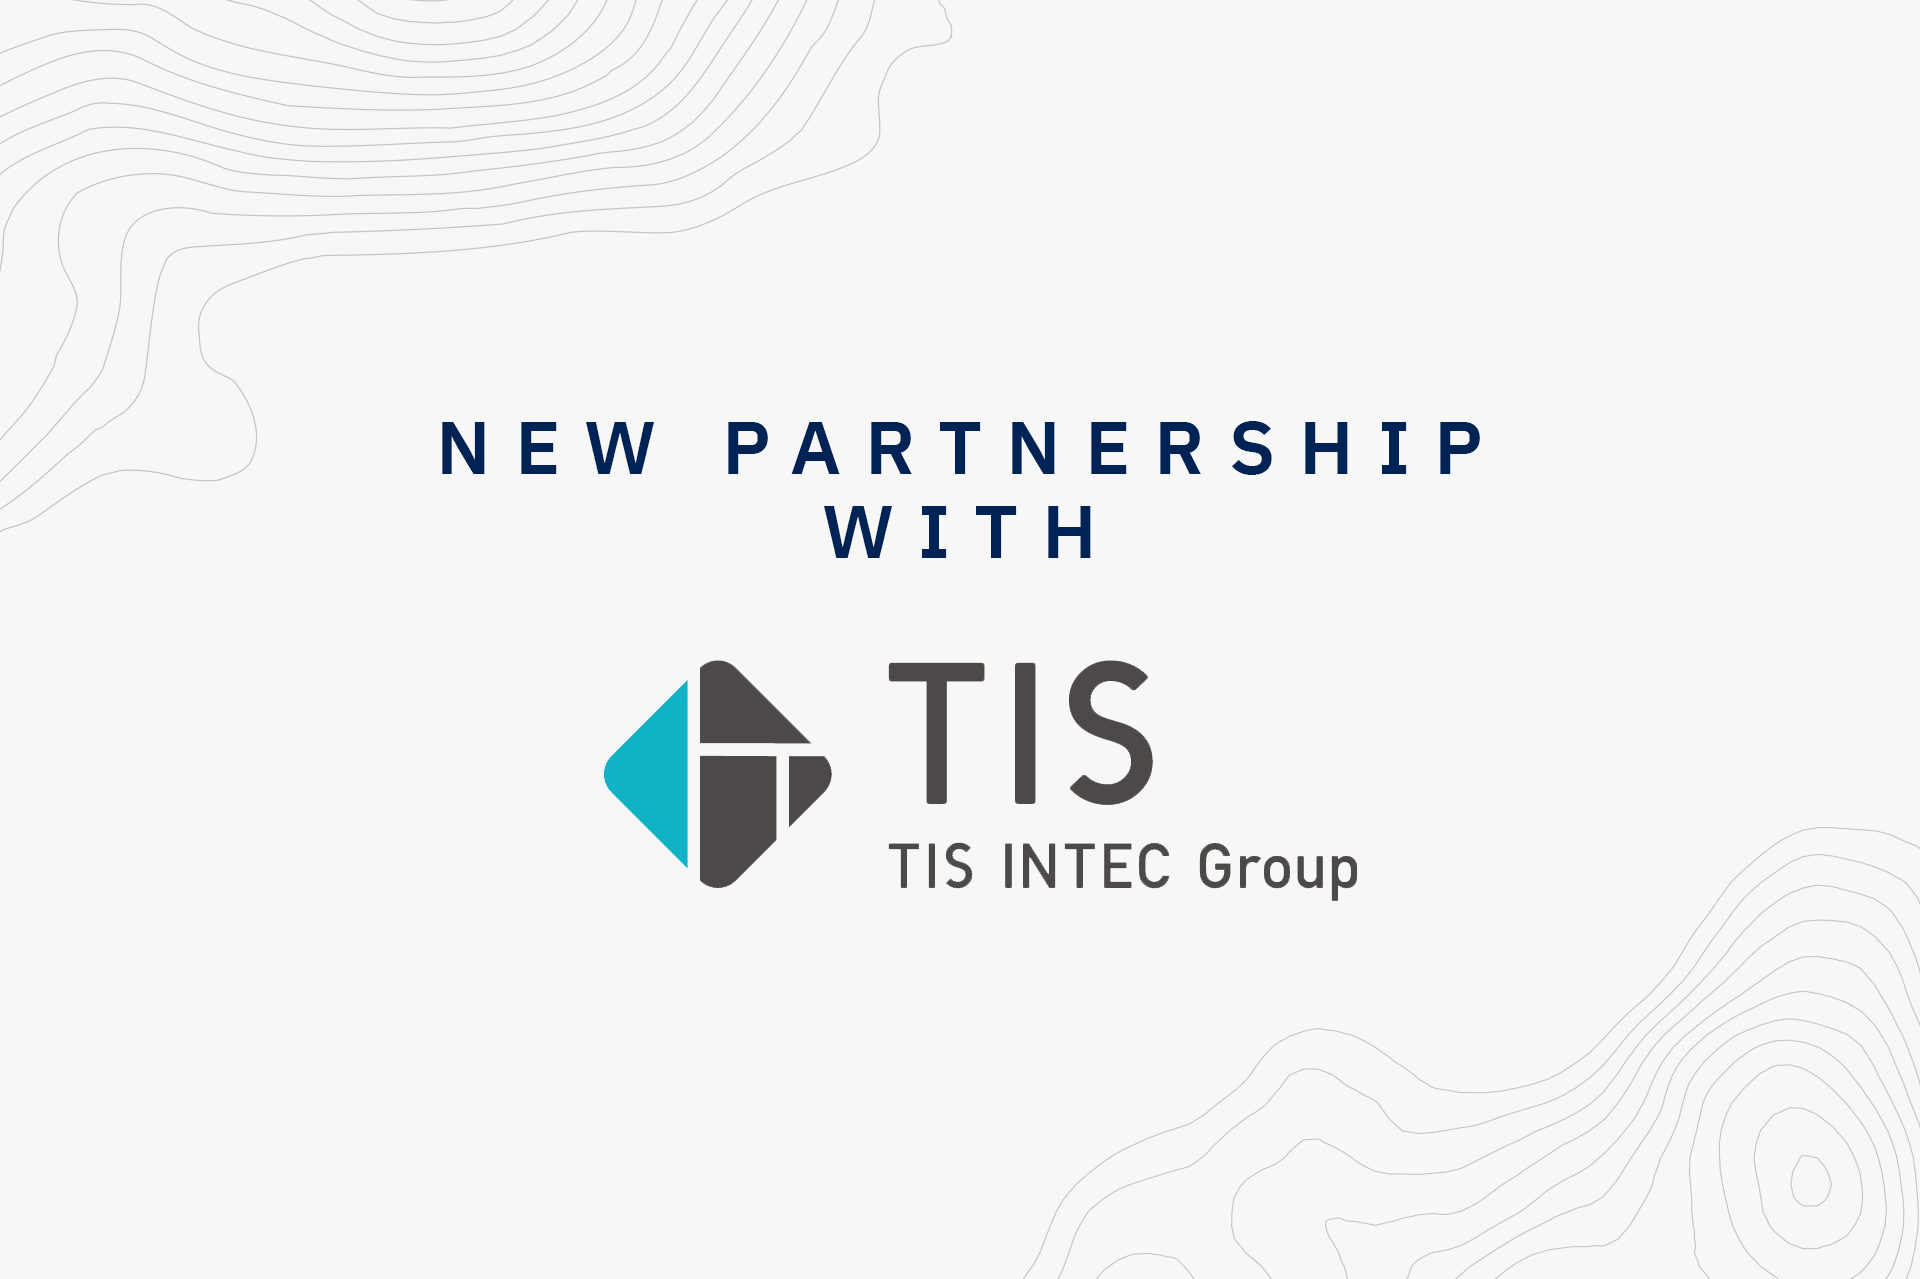 Contour partners with TIS INTEC Group to ramp up digitisation of trade finance in Japan